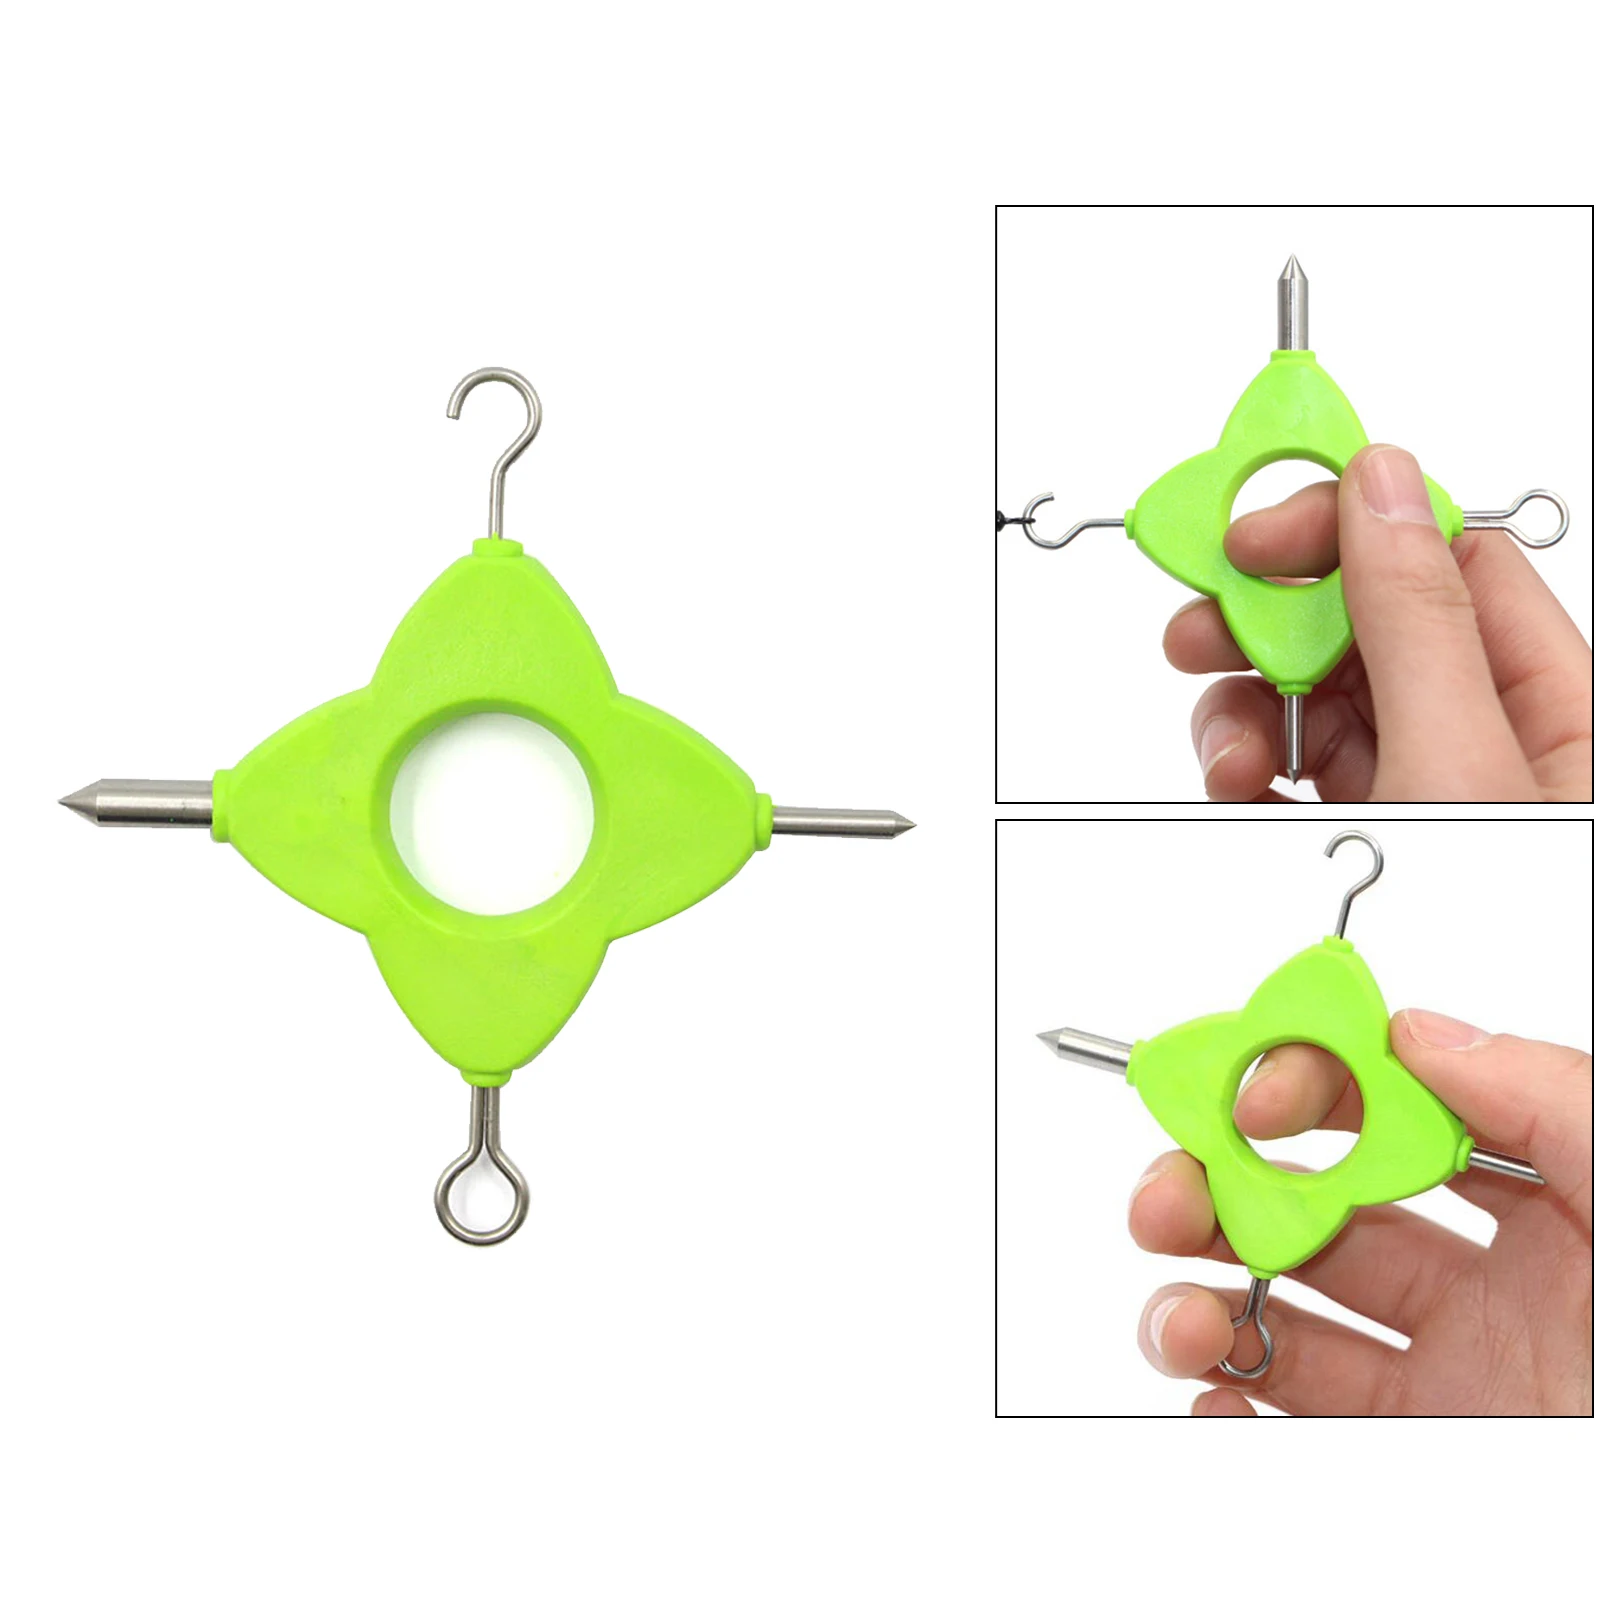 Portable 4in1 Fishing Puller Knotter Multi-Purpose Outdoor Knottting Tools